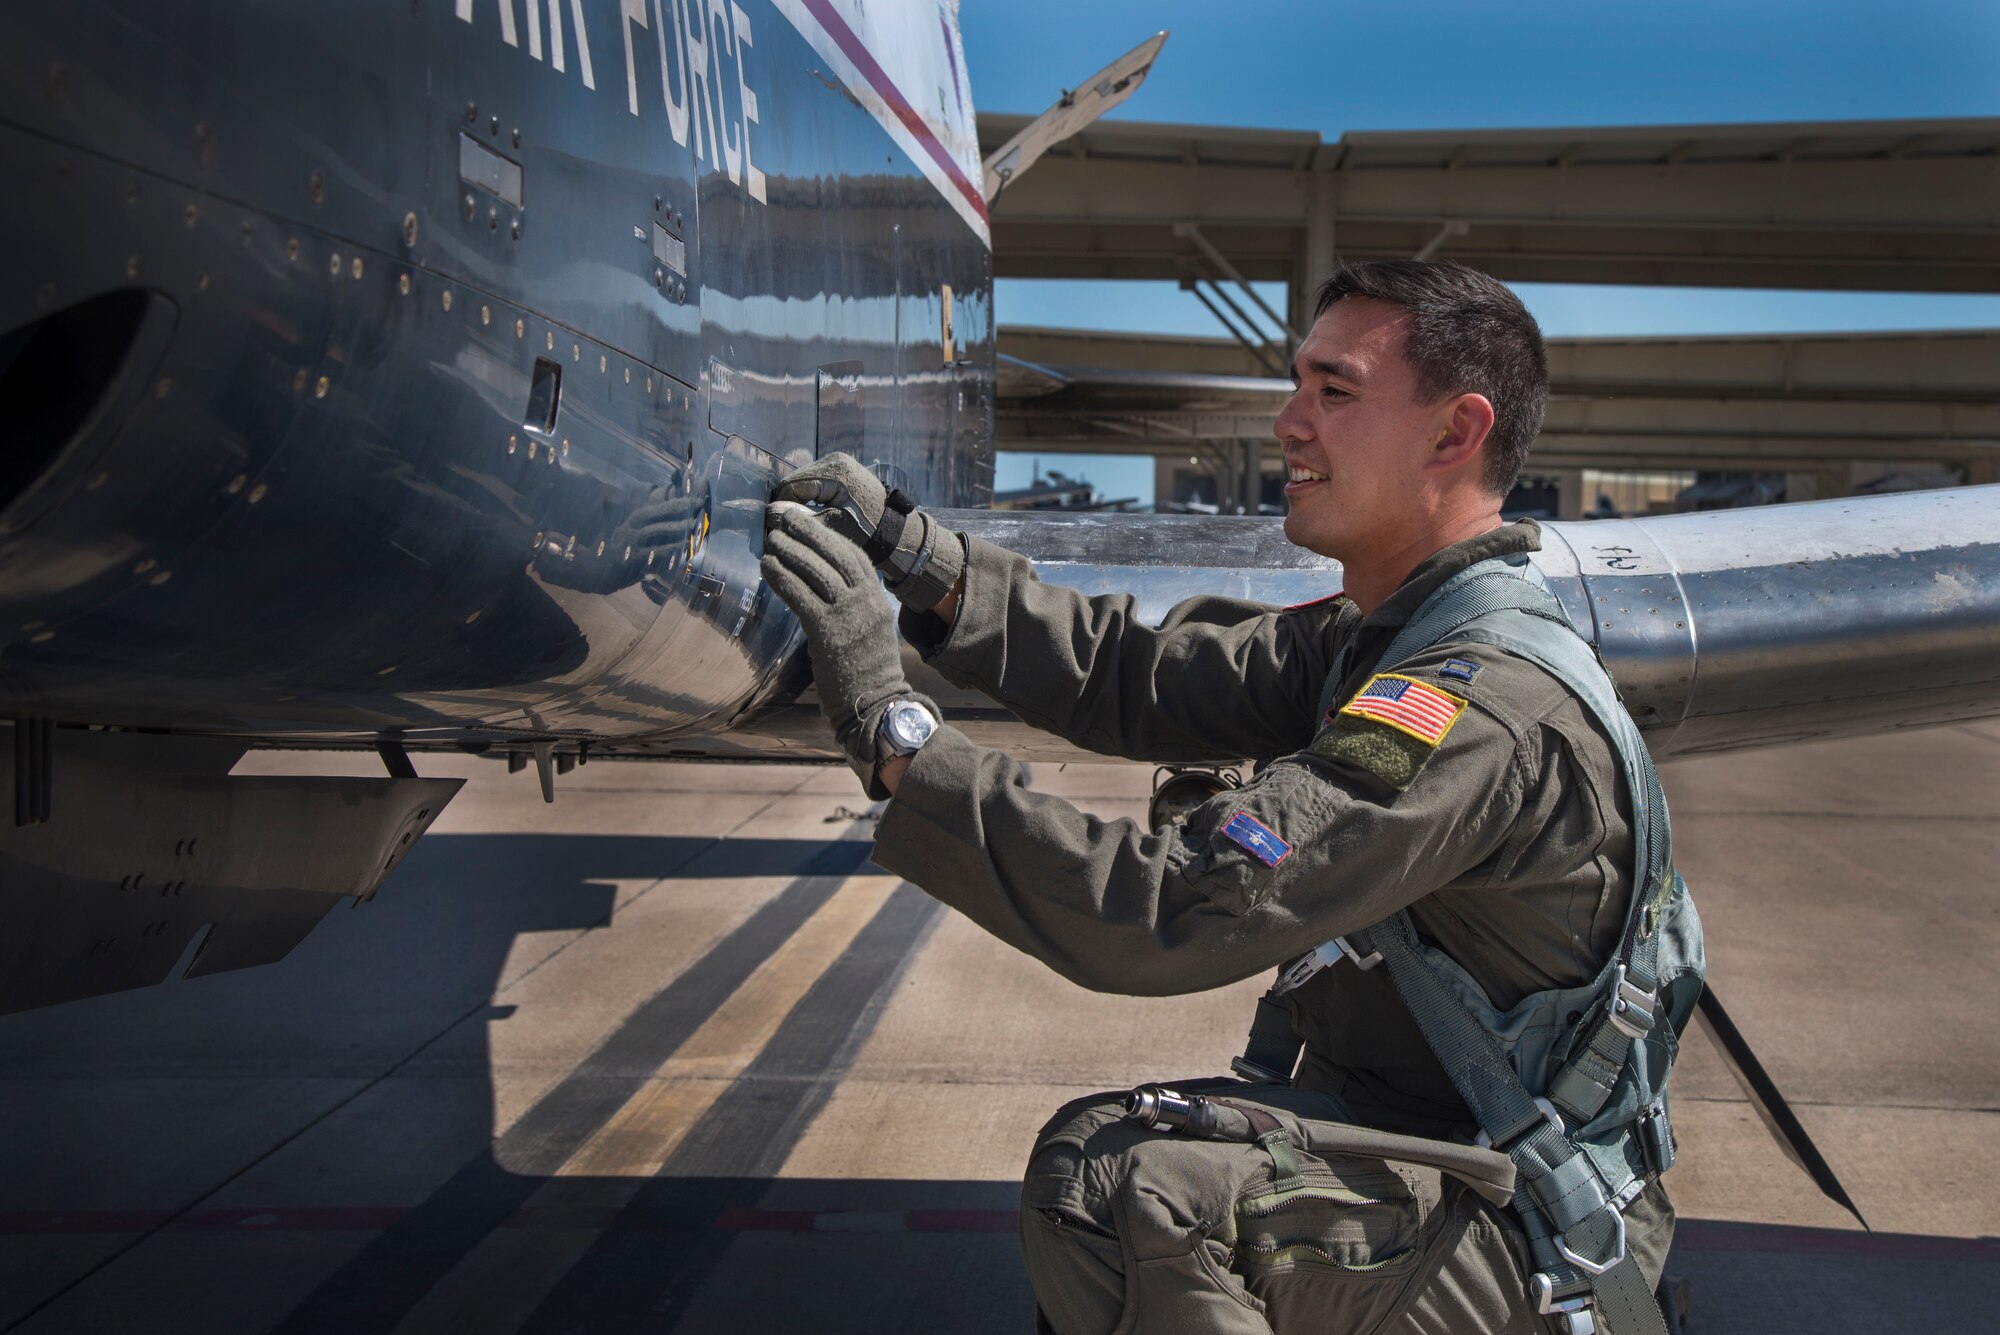 Capt. Harold Parker, 434th Flying Training Squadron flight commander and T-6A Texan II instructor pilot, completes steps in his pre-flight checklist, Oct. 10, 2018, at Laughlin Air Force Base, Texas. Parker earned the “Xler of the week” award for helping his student’s complete pilot training and increase base morale by organizing this year’s Adventure Race. (U.S. Air Force photo by Senior Airman Daniel Hambor)